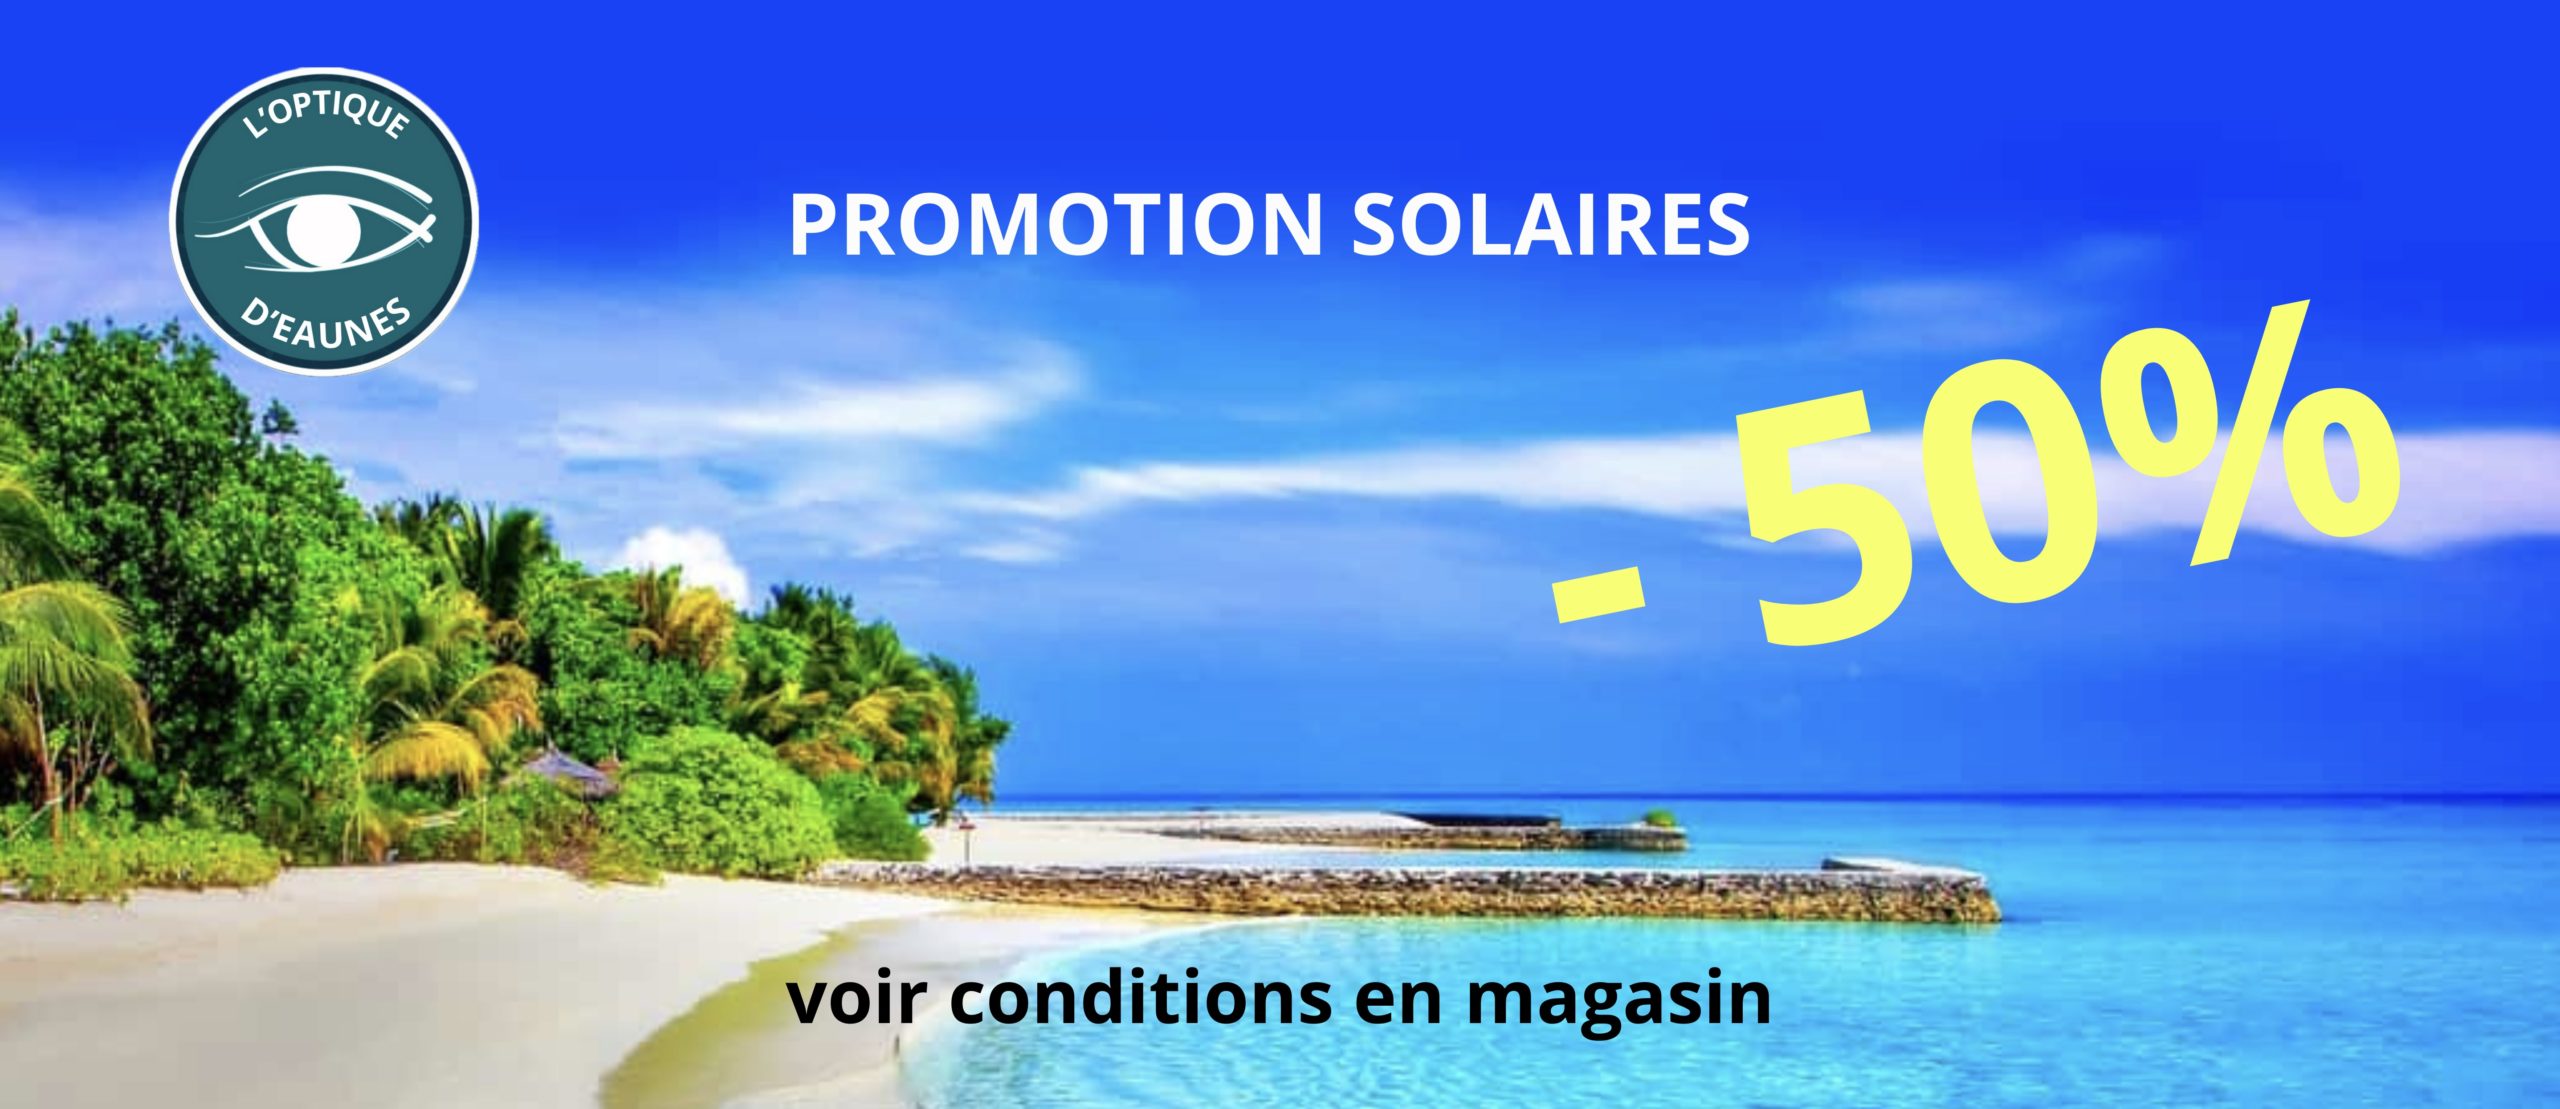 PROMOTION-SOLAIRES-scaled